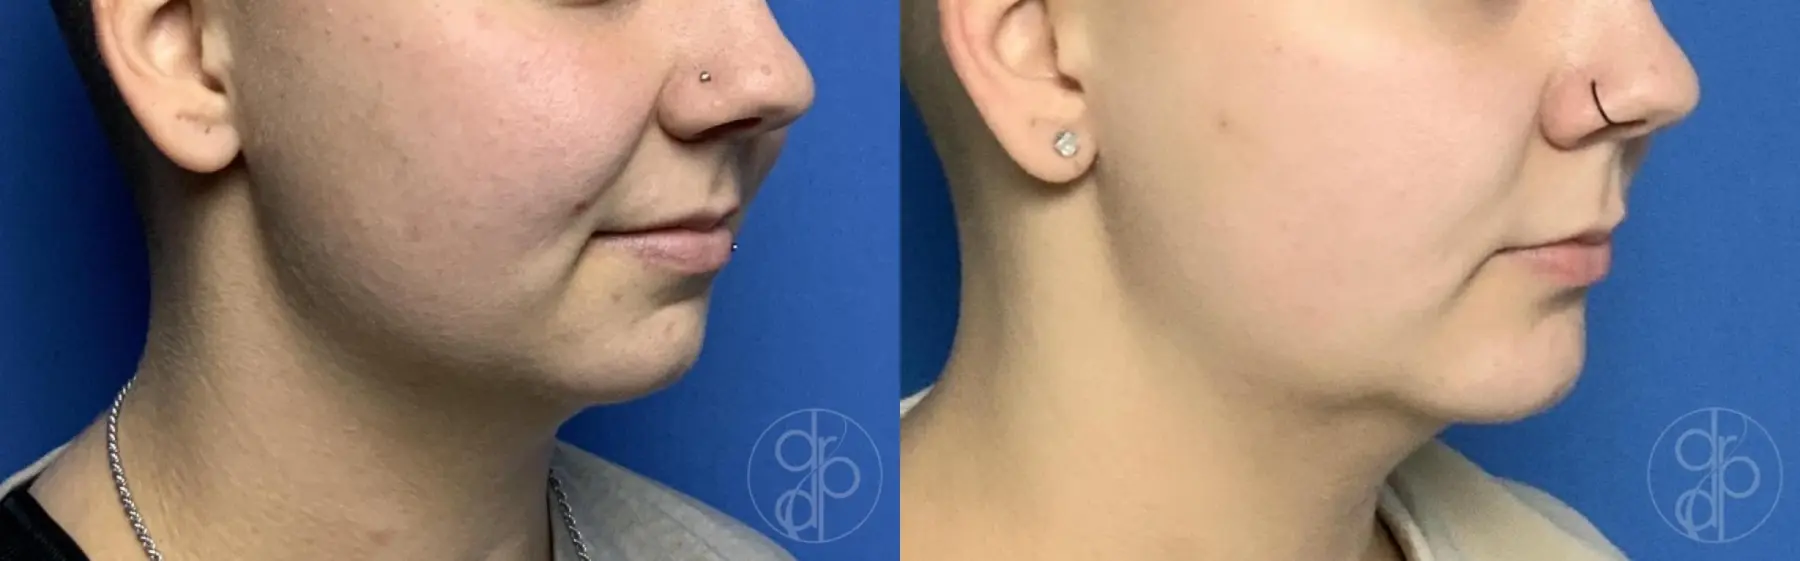 patient 12469 chin augmentation before and after result - Before and After 2